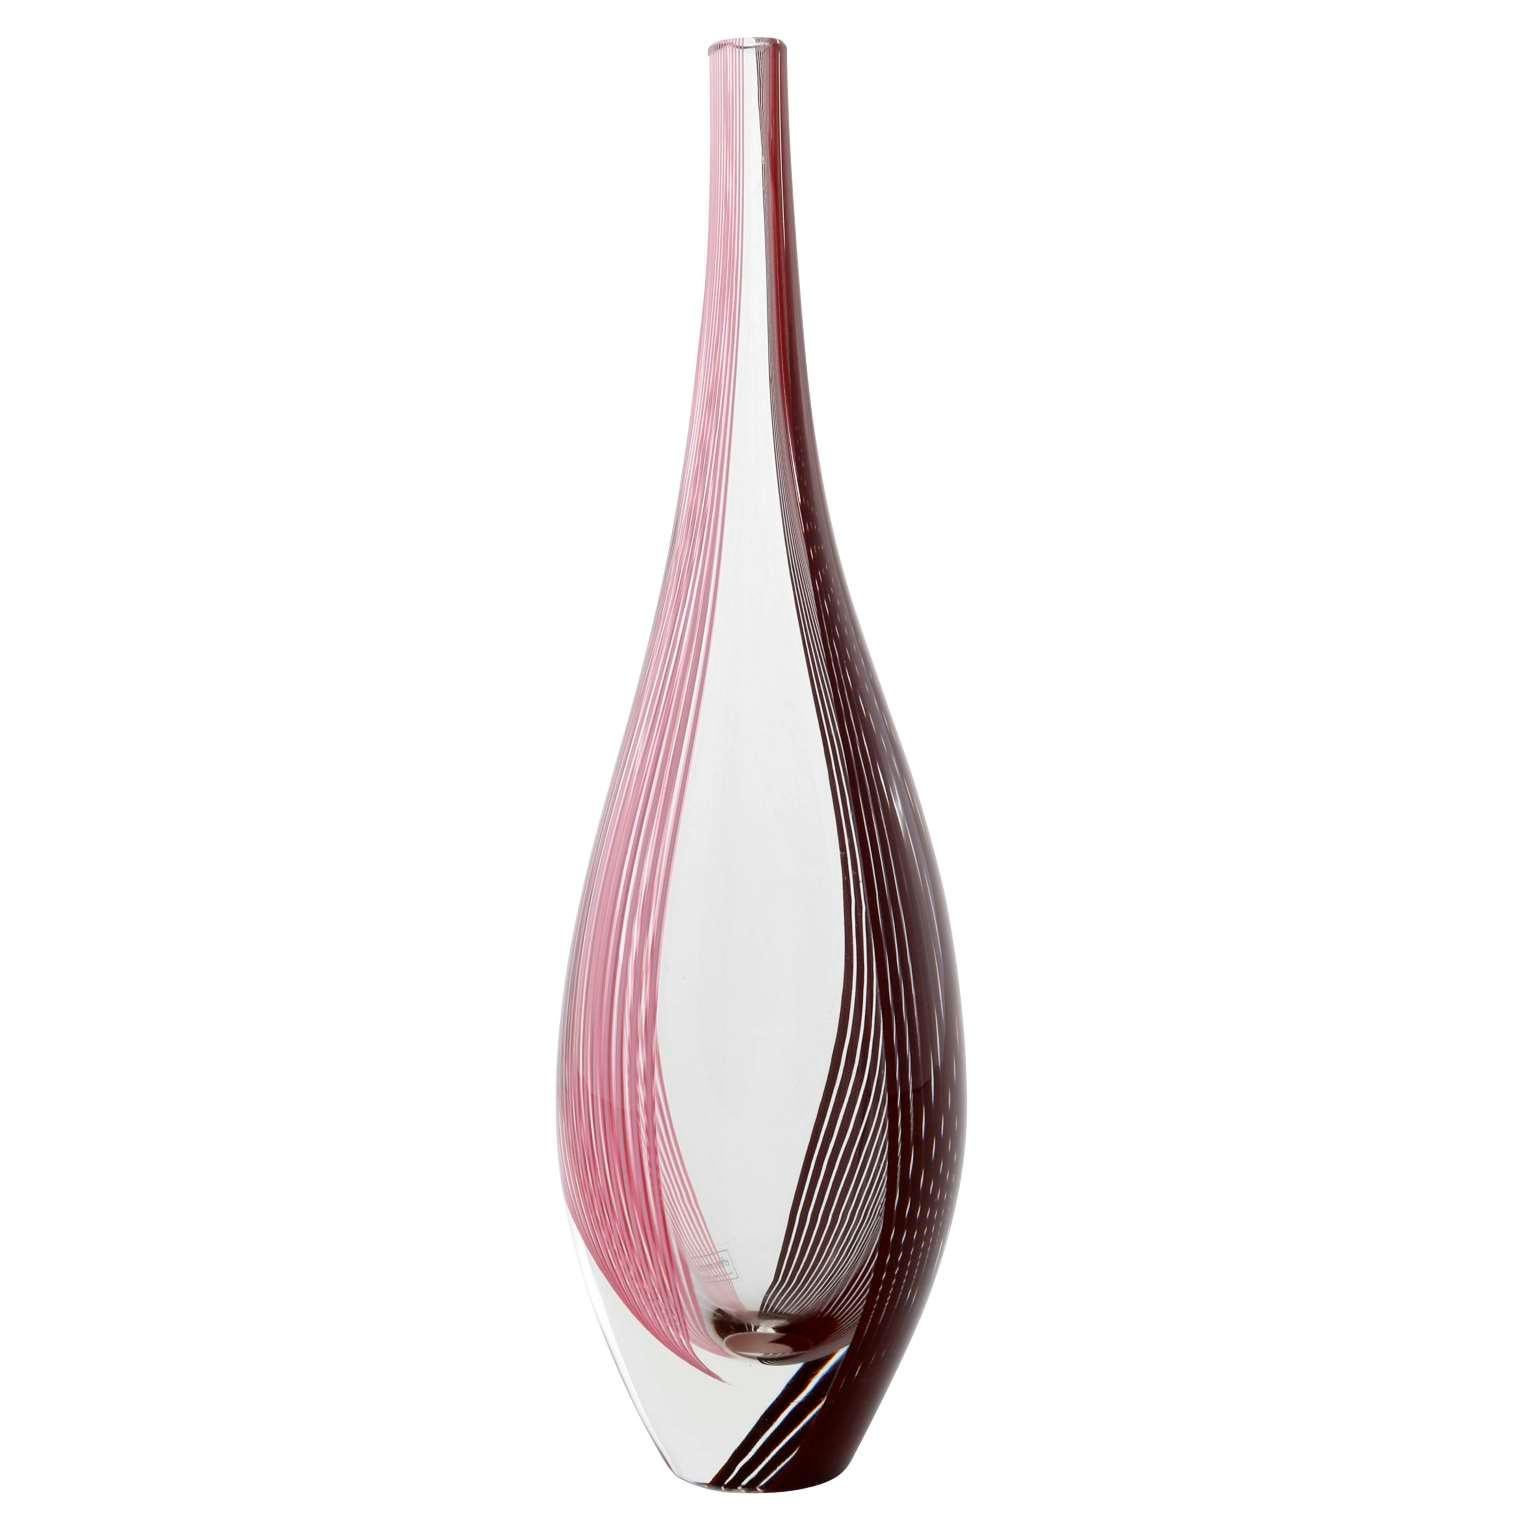 A beautiful Italian glass vase by Lino Tagliapietra for Effetre International, Murano, 1986.
Clear glass with pink, red, and purple strips.
The vase still has an Effetre International label on it.
It is also graven at the bottom with Lino